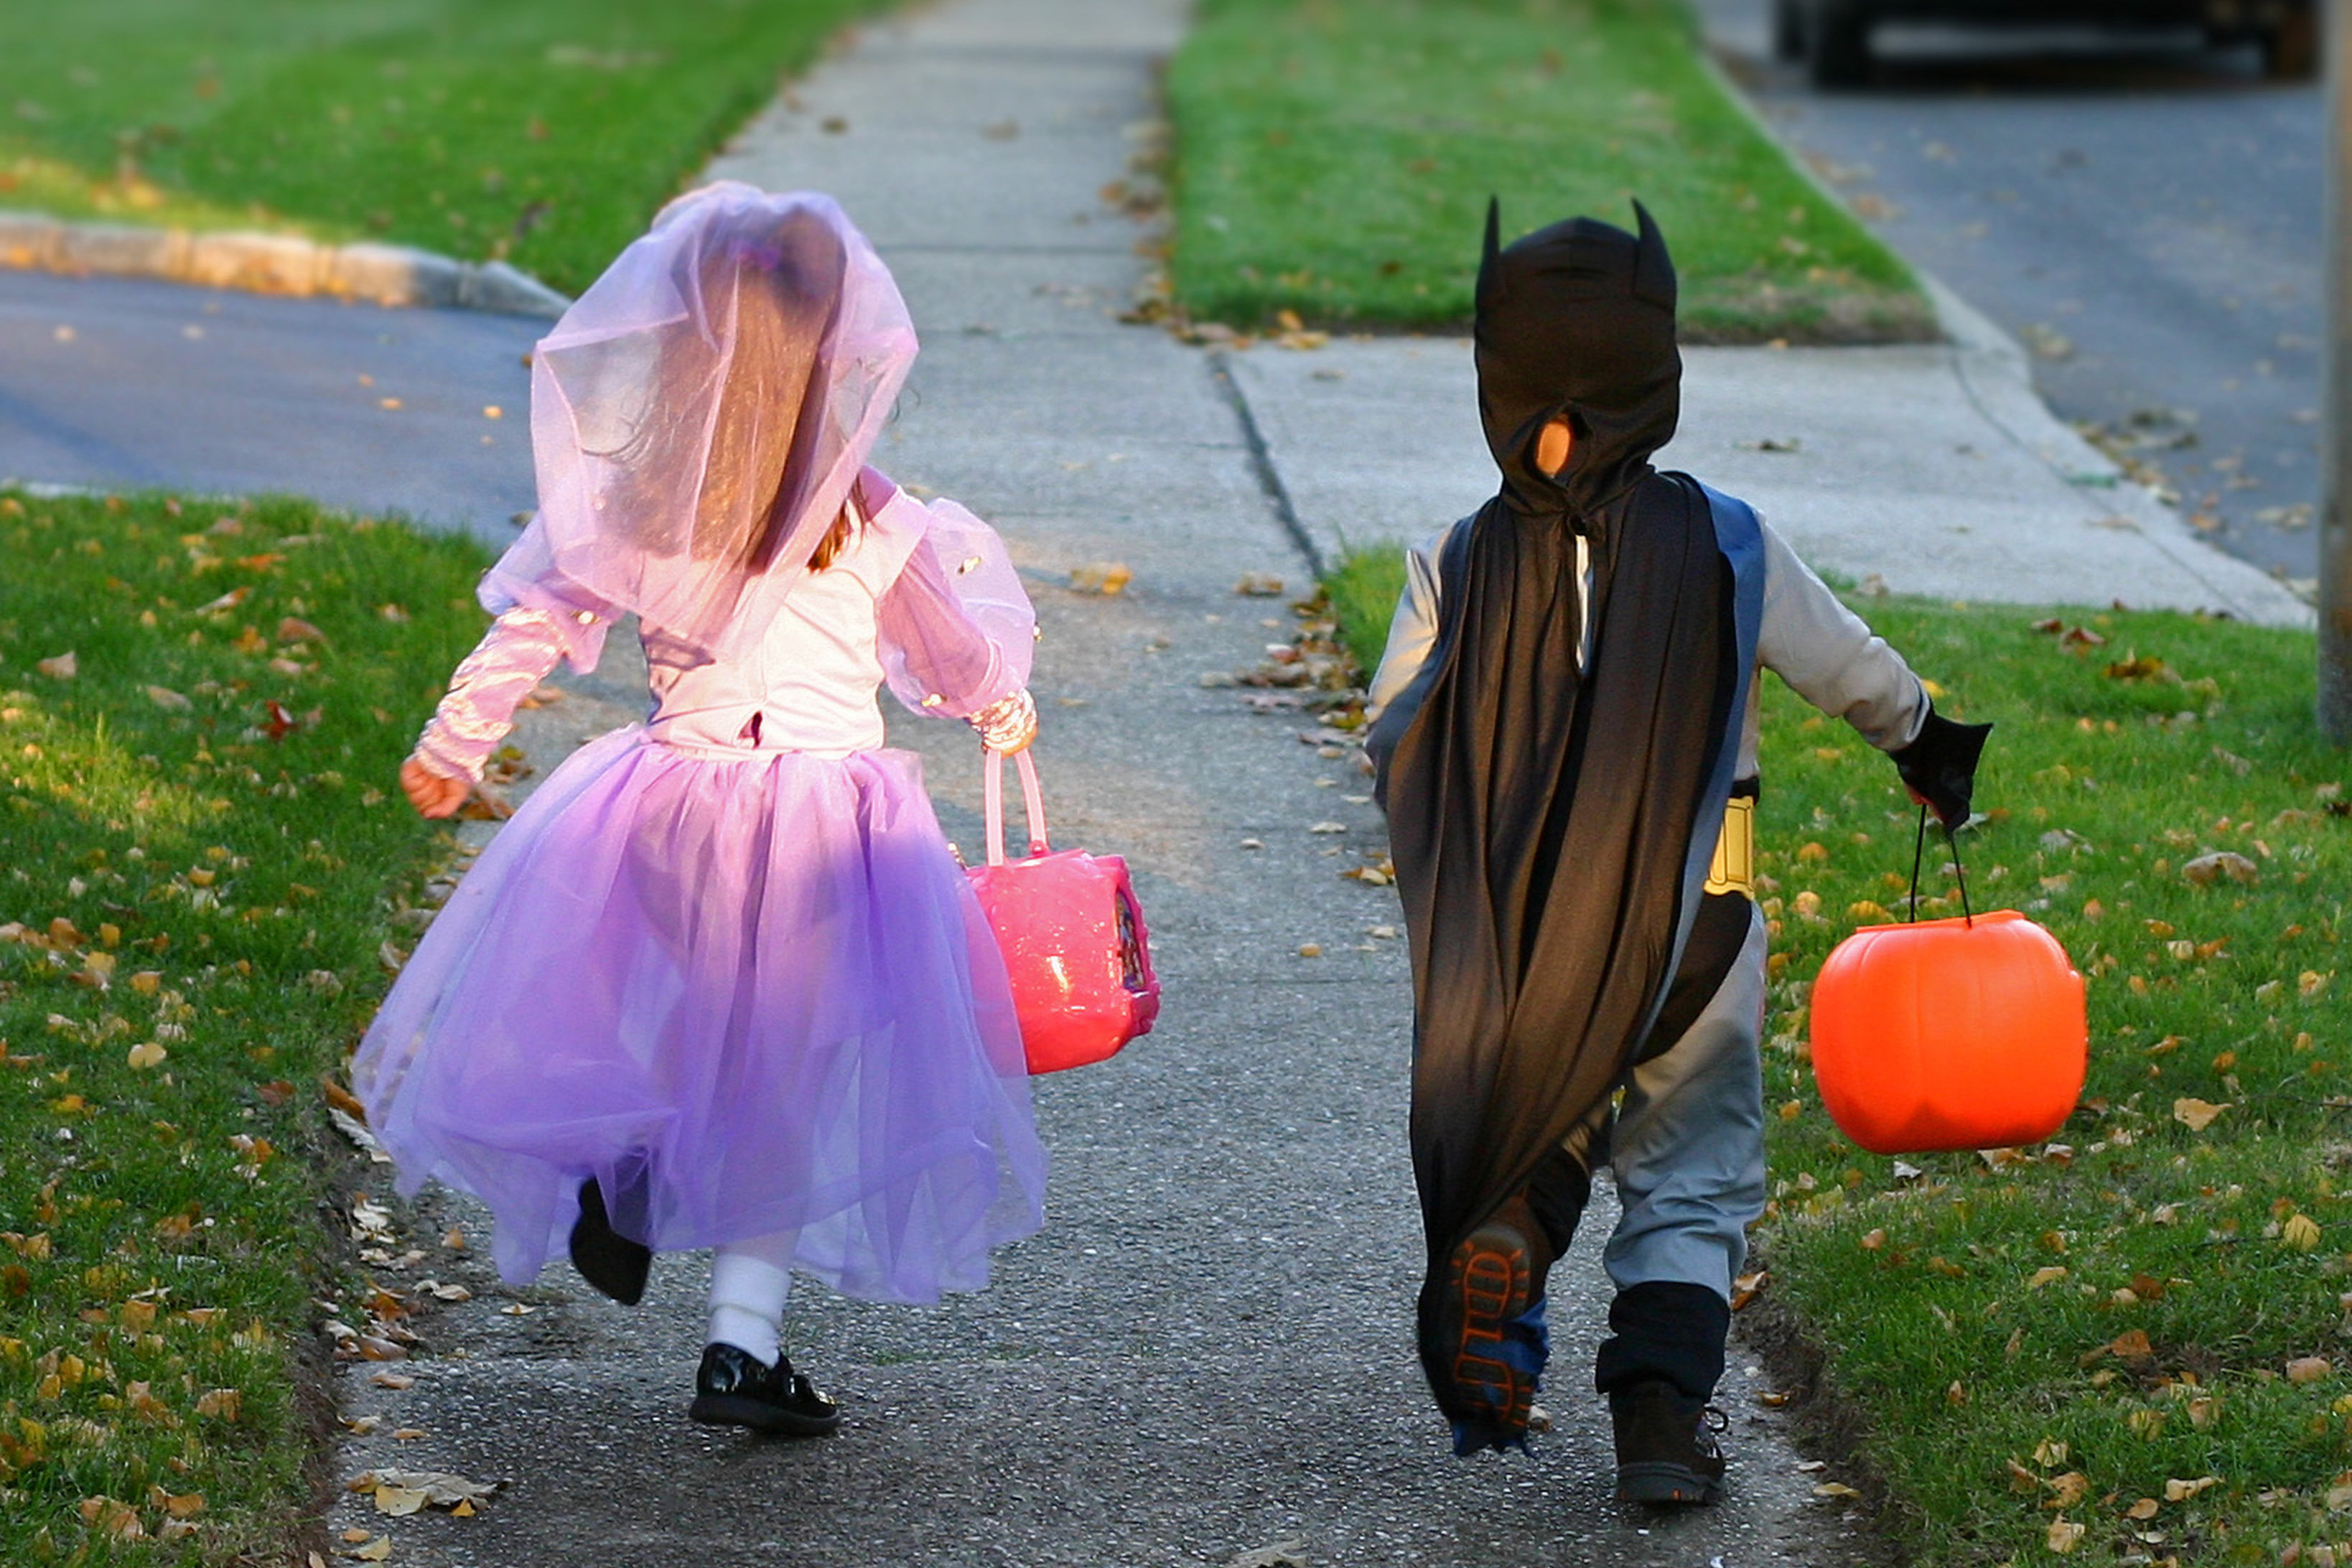 Village Board Approves Trick-or-Treating Hours for Sunday, October 30th 2:00- 5:00 p.m.